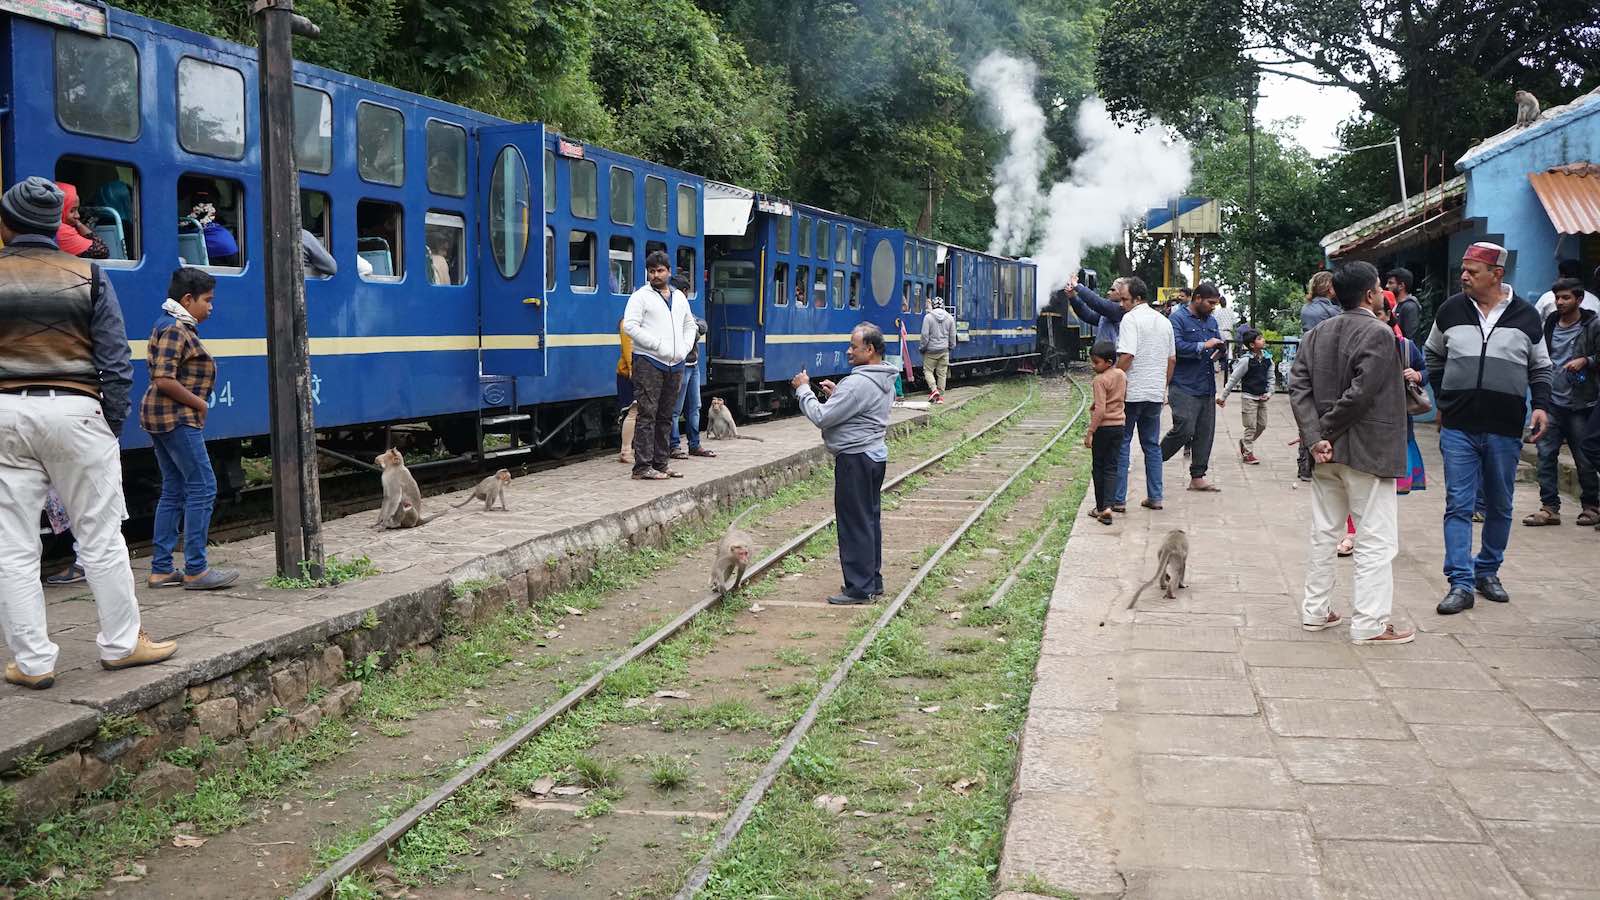 We also made a couple pit stops and at each one a bunch of wild monkeys would come swarm the train station. They knew they could get free snacks that way.